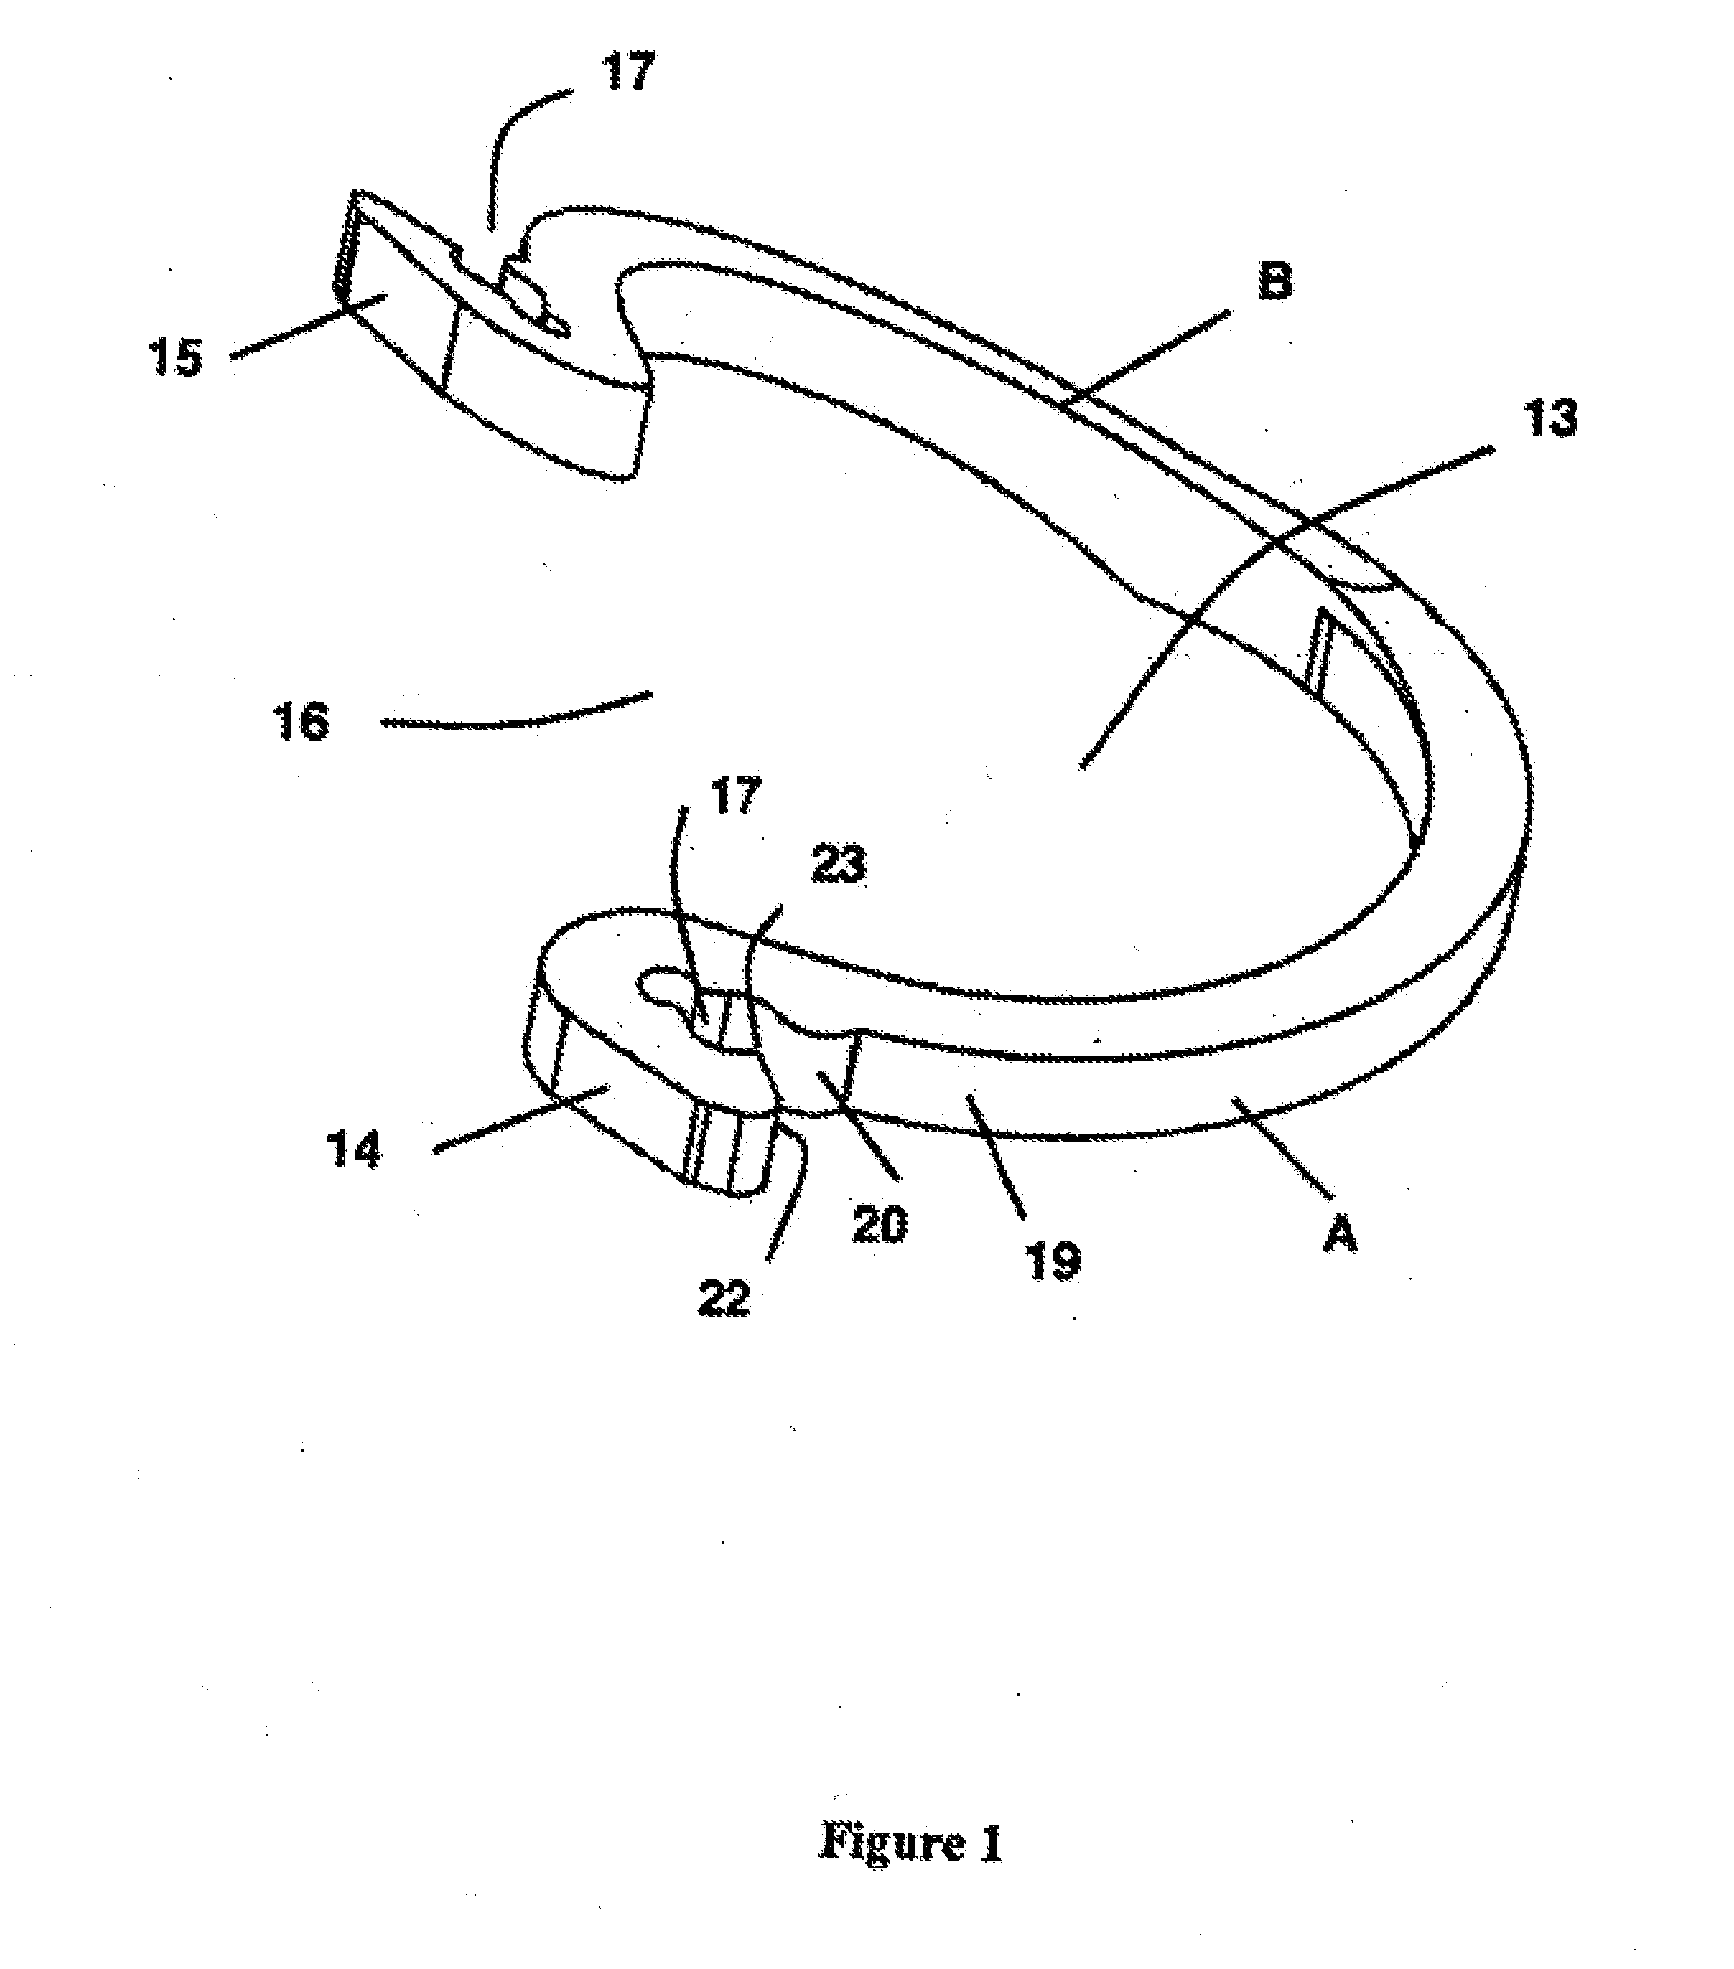 Device for fastening and holding a creeping plant along a carrying wire